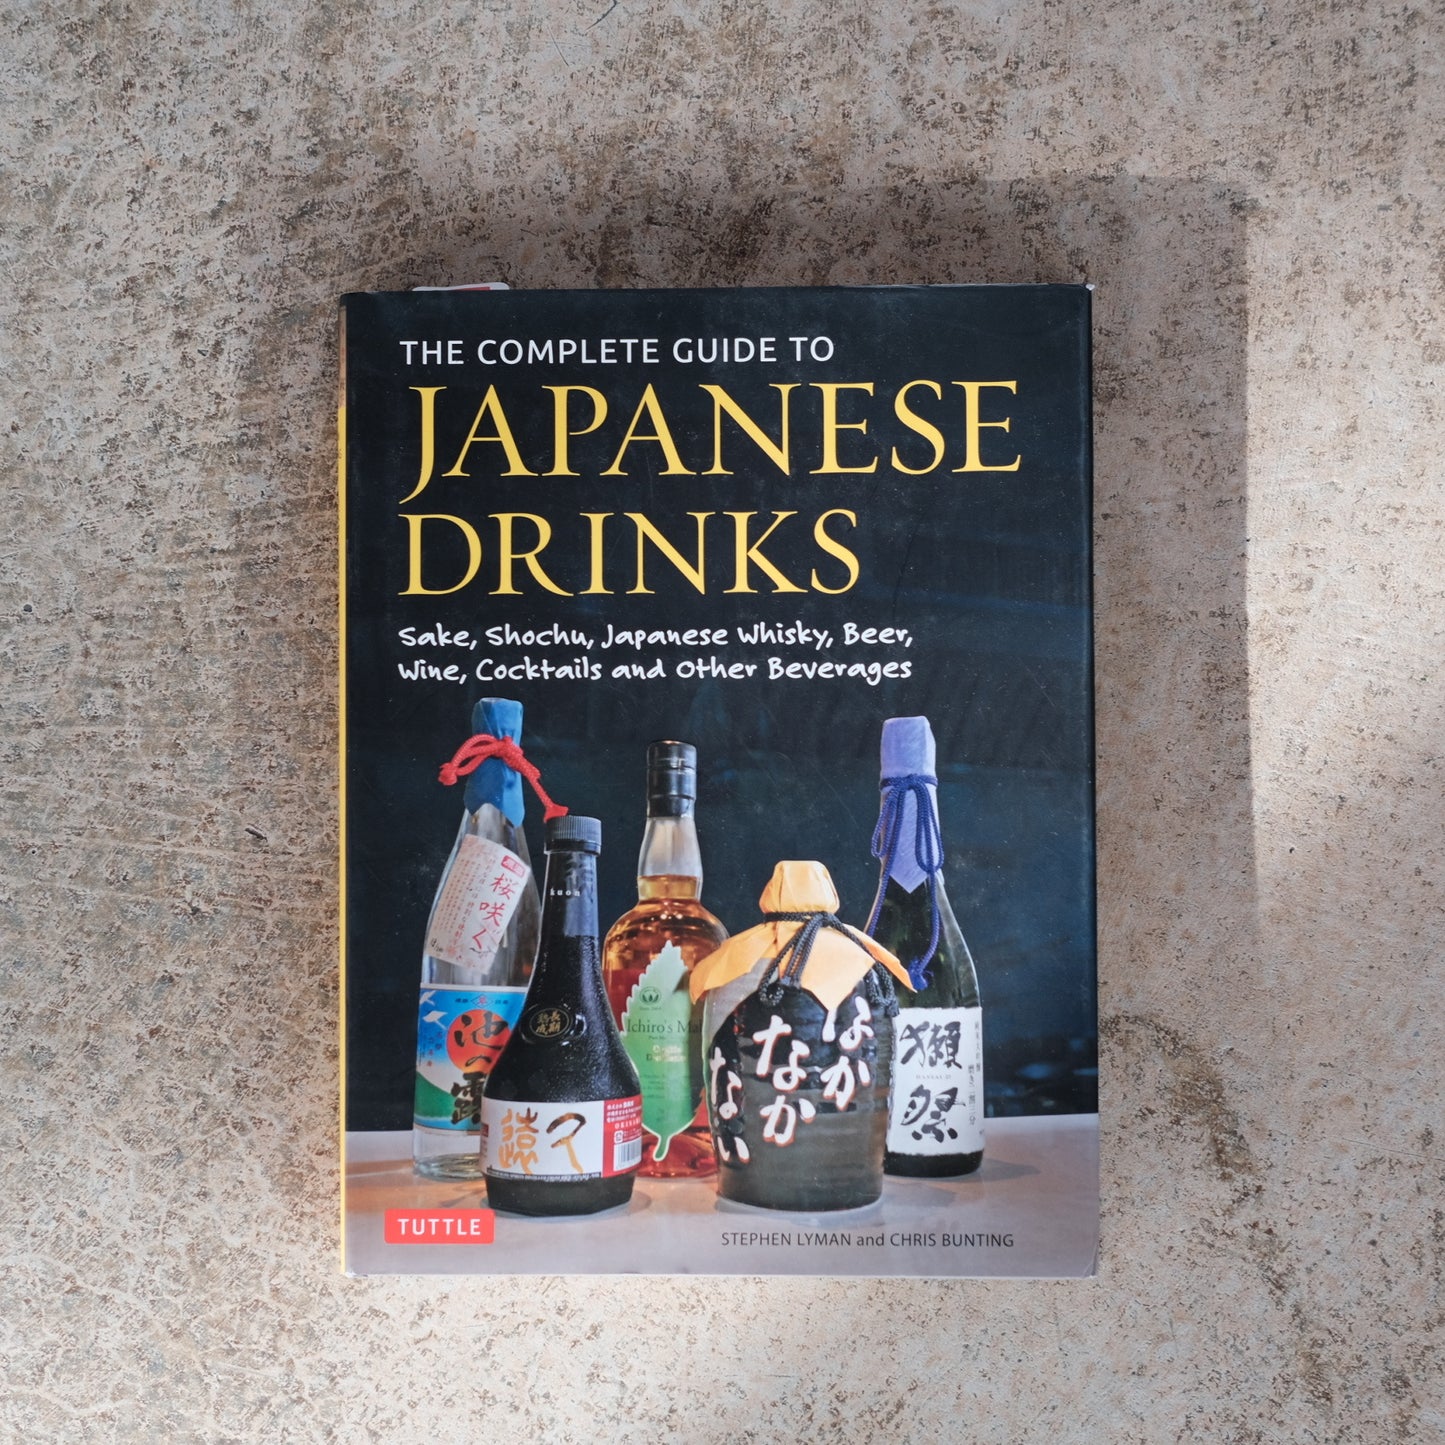 The Complete Guide to Japanese Drinks